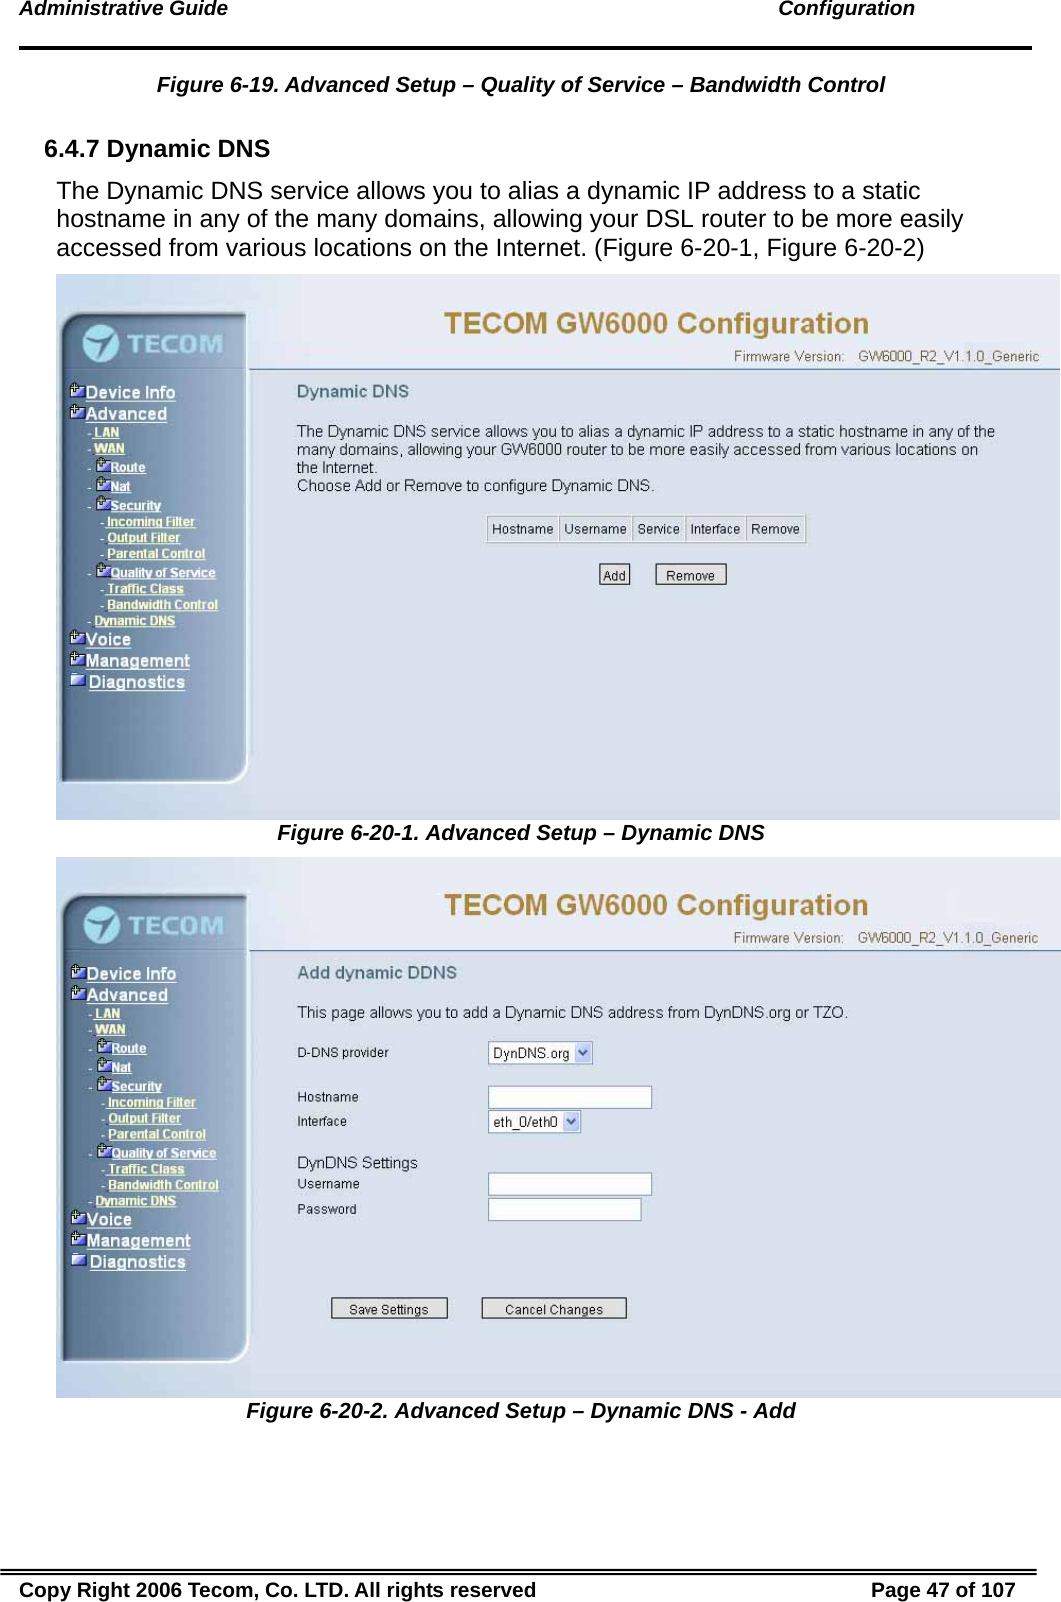 Administrative Guide                                                                                               Configuration Figure 6-19. Advanced Setup – Quality of Service – Bandwidth Control  6.4.7 Dynamic DNS The Dynamic DNS service allows you to alias a dynamic IP address to a static hostname in any of the many domains, allowing your DSL router to be more easily accessed from various locations on the Internet. (Figure 6-20-1, Figure 6-20-2)  Figure 6-20-1. Advanced Setup – Dynamic DNS  Figure 6-20-2. Advanced Setup – Dynamic DNS - Add Copy Right 2006 Tecom, Co. LTD. All rights reserved  Page 47 of 107 